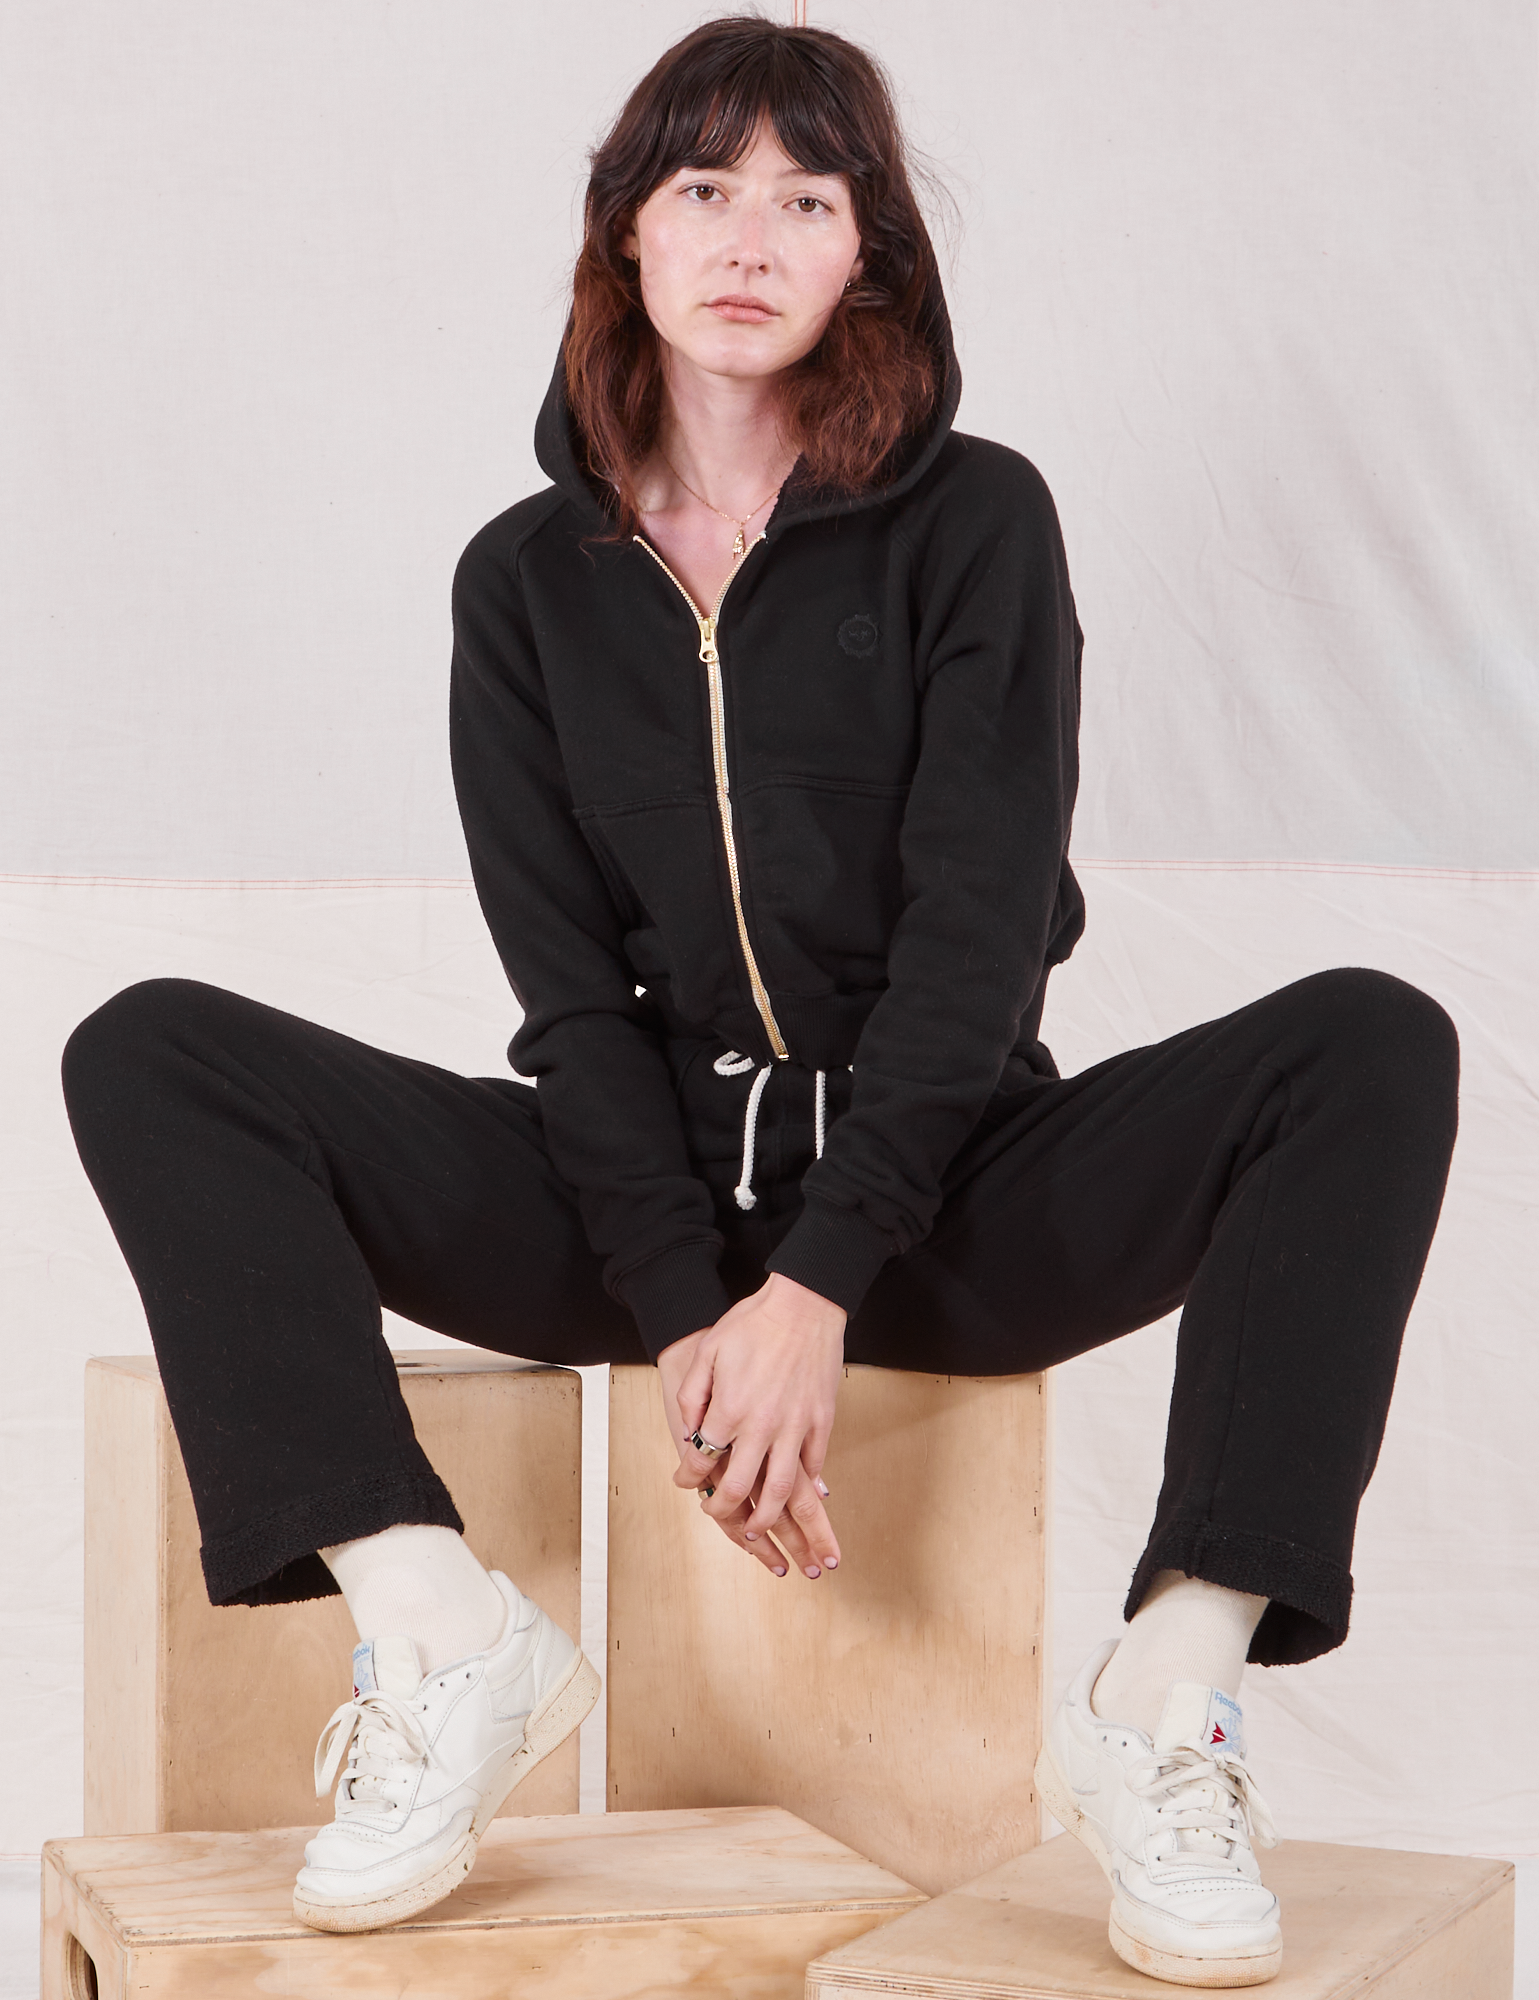 Alex is wearing Cropped Zip Hoodie in Basic Black and matching Rolled Cuff Sweat Pants